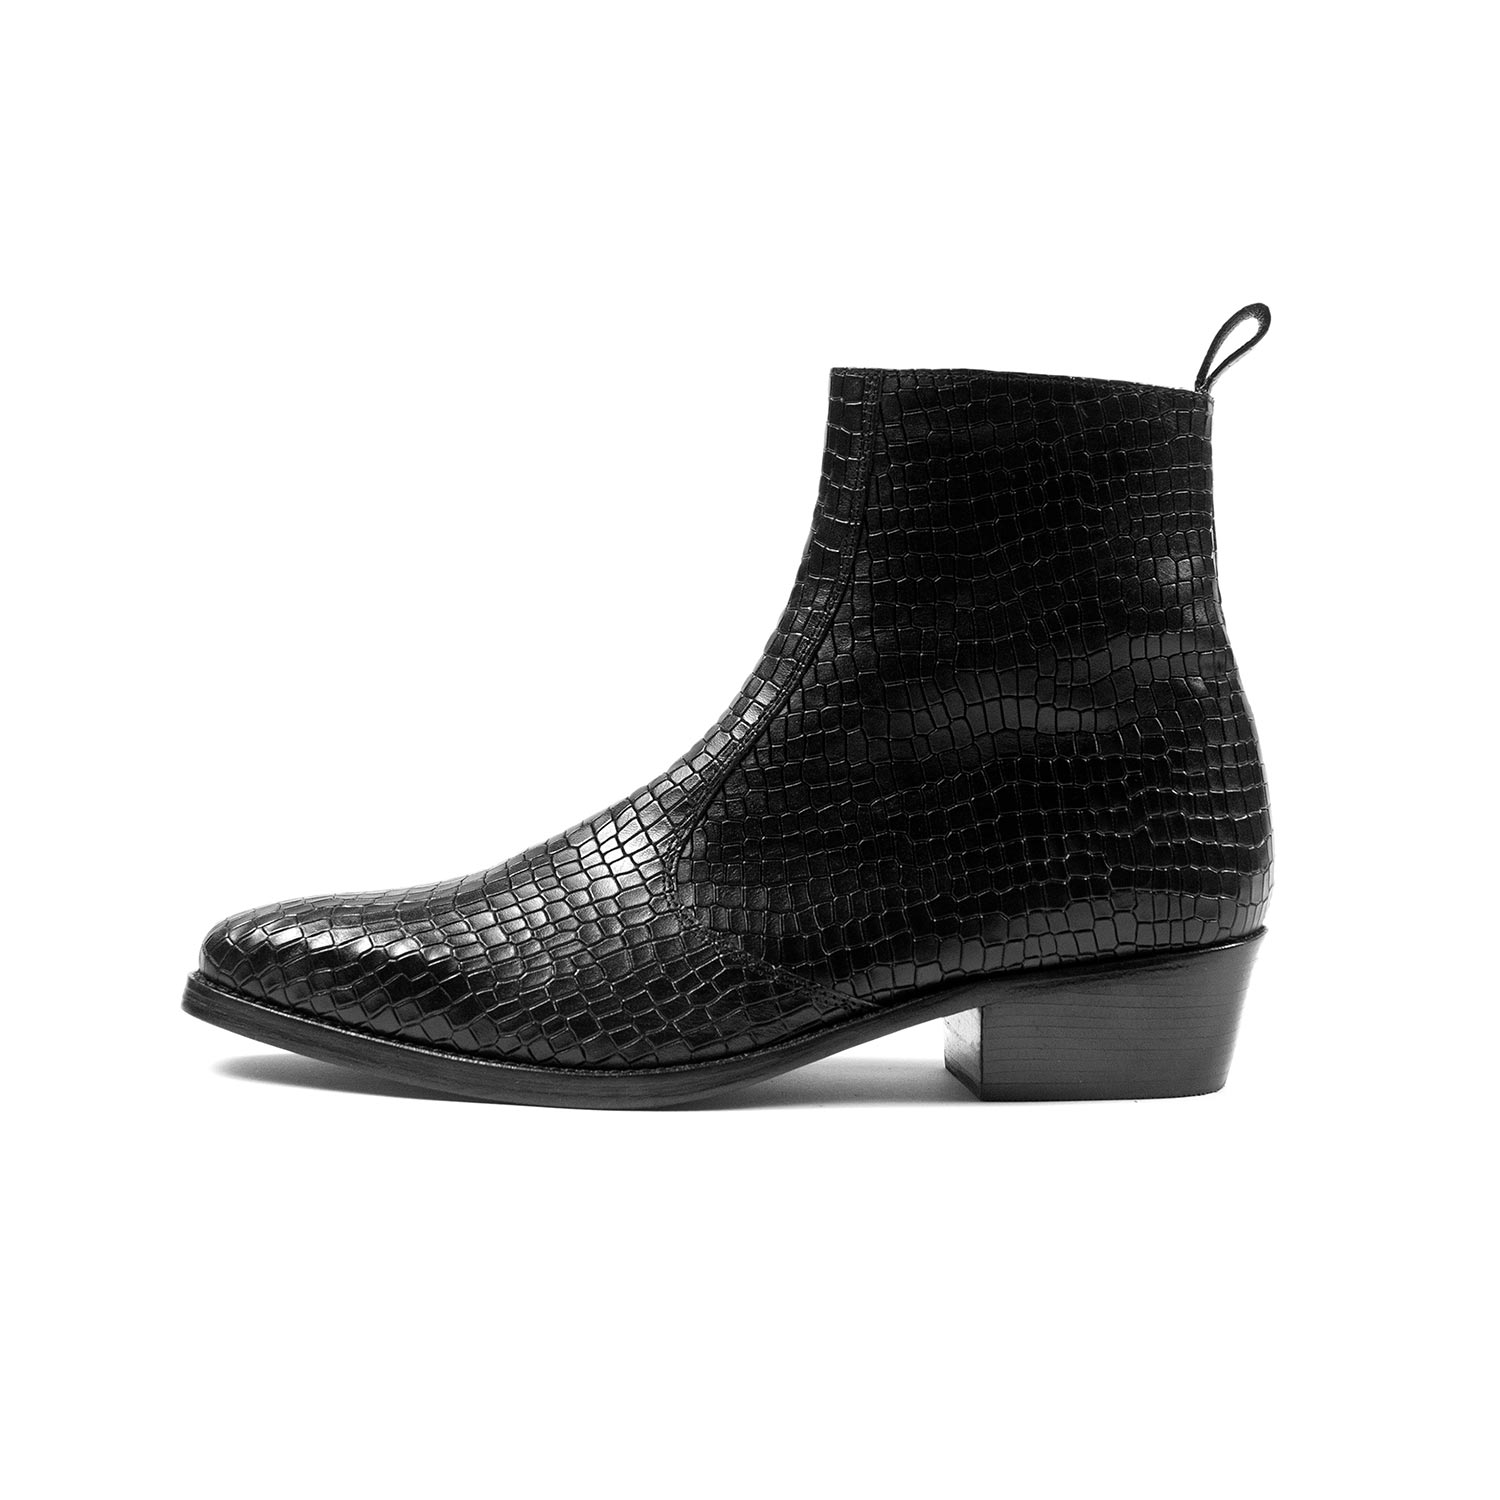 Richards - Black Snakeskin (Size 7.5) | Straight To Hell Apparel